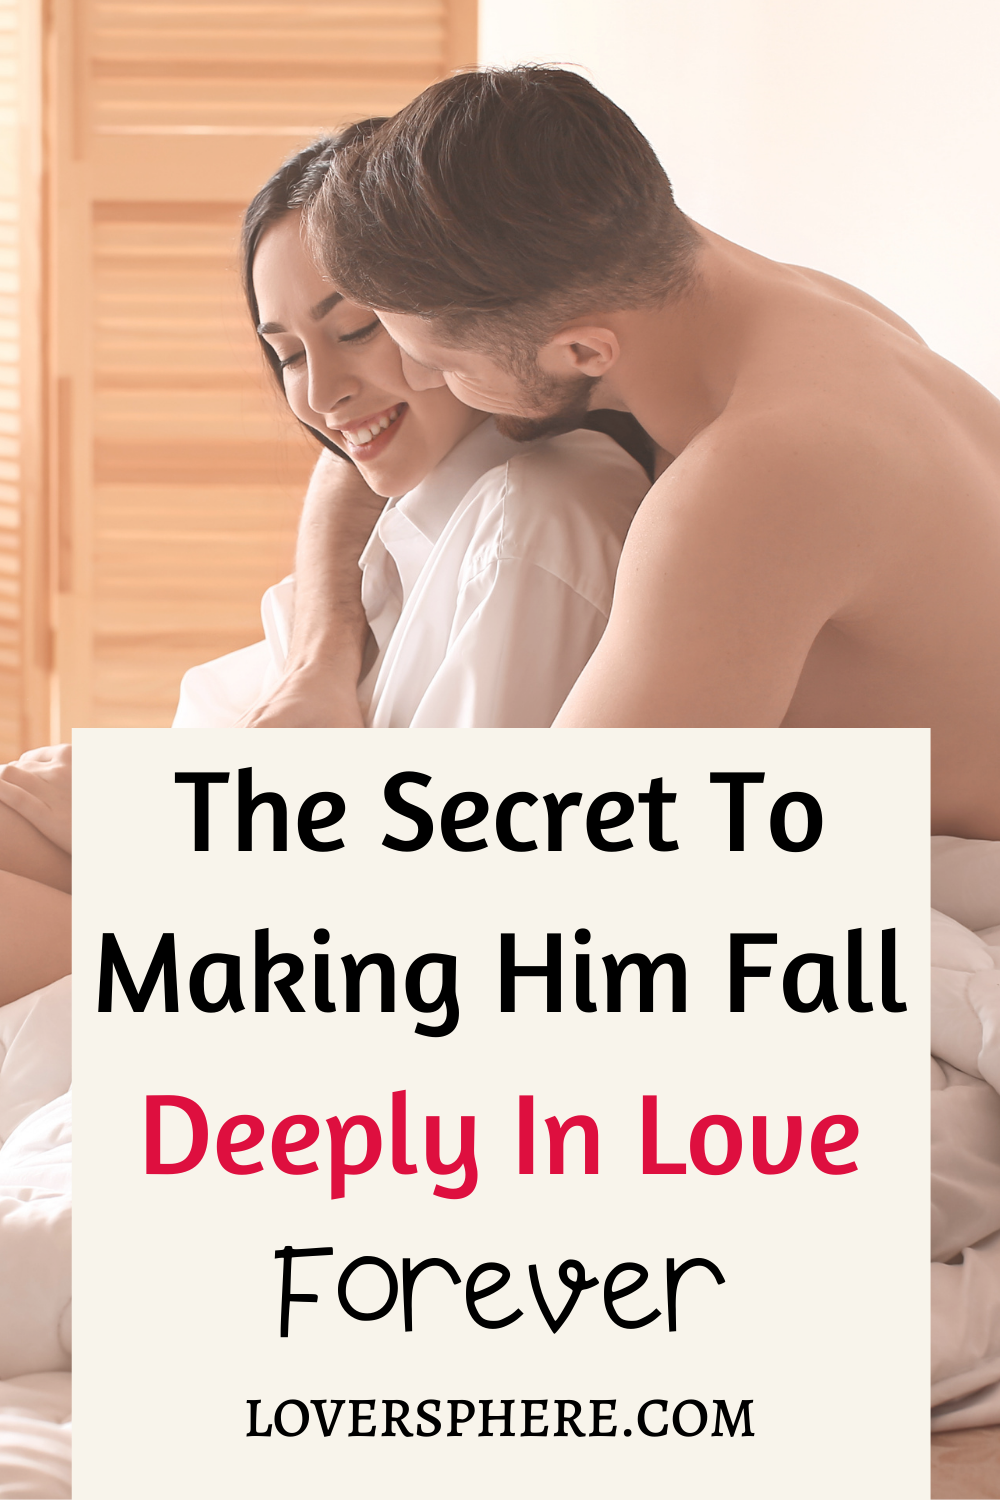 Signs a man loves you deeply